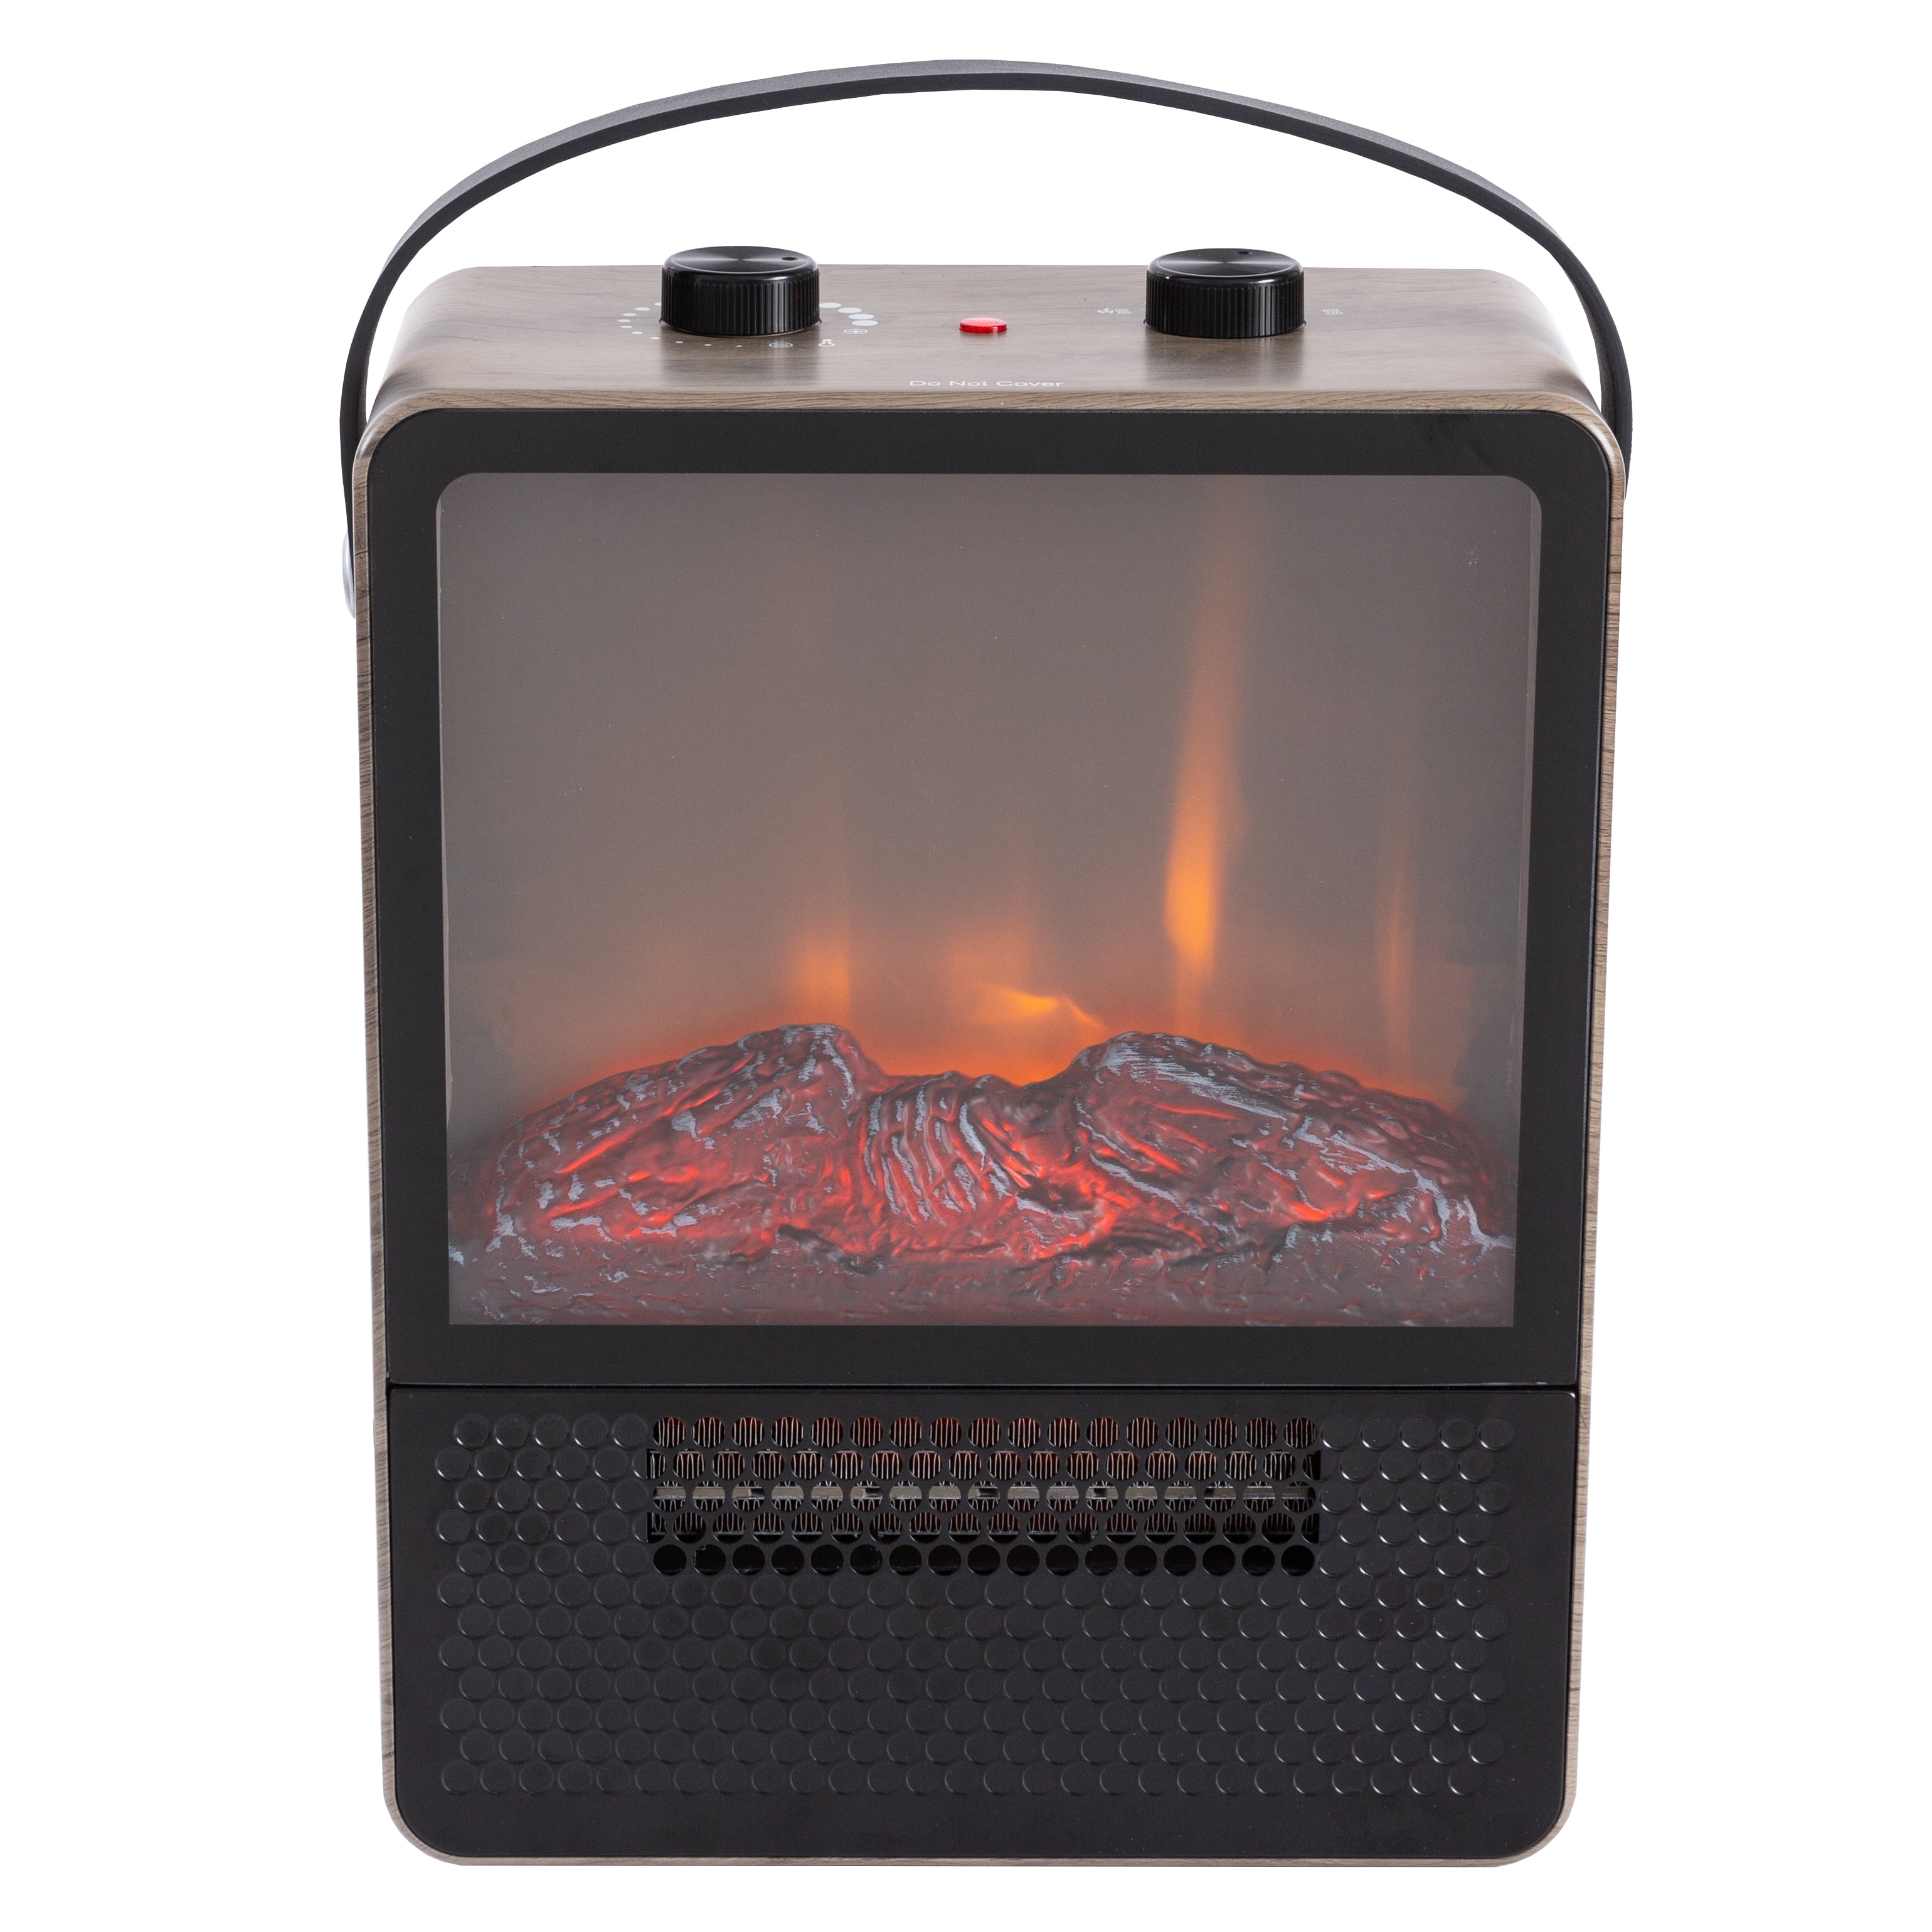 Portable Electric Stove Heater with Stay-Cool Surface - Black